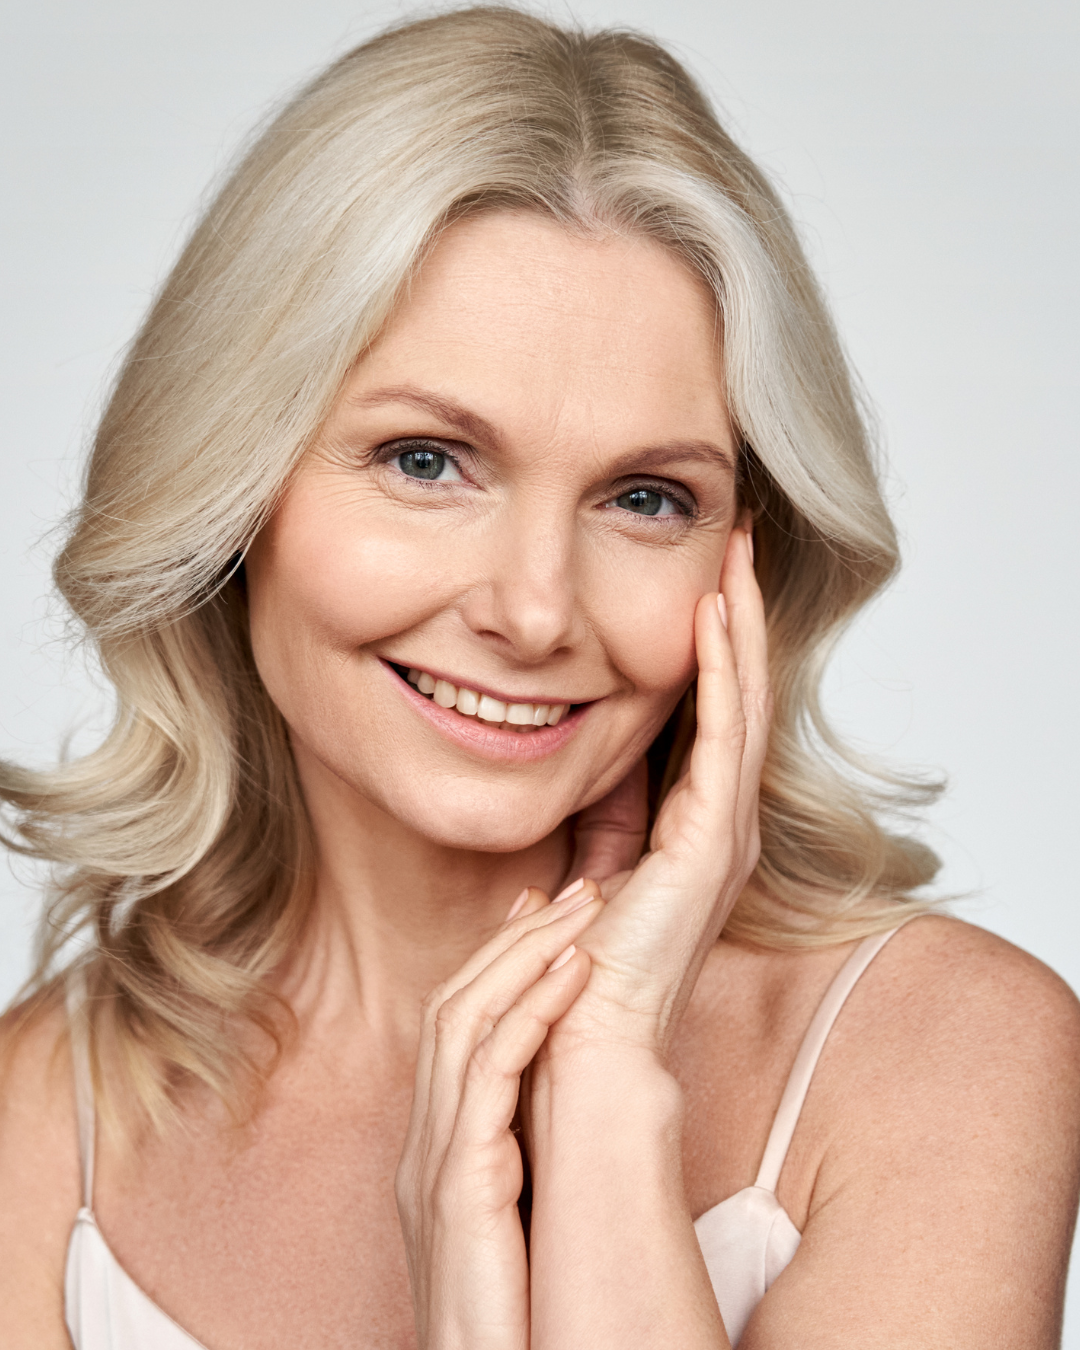 What does menopausal skin care need?